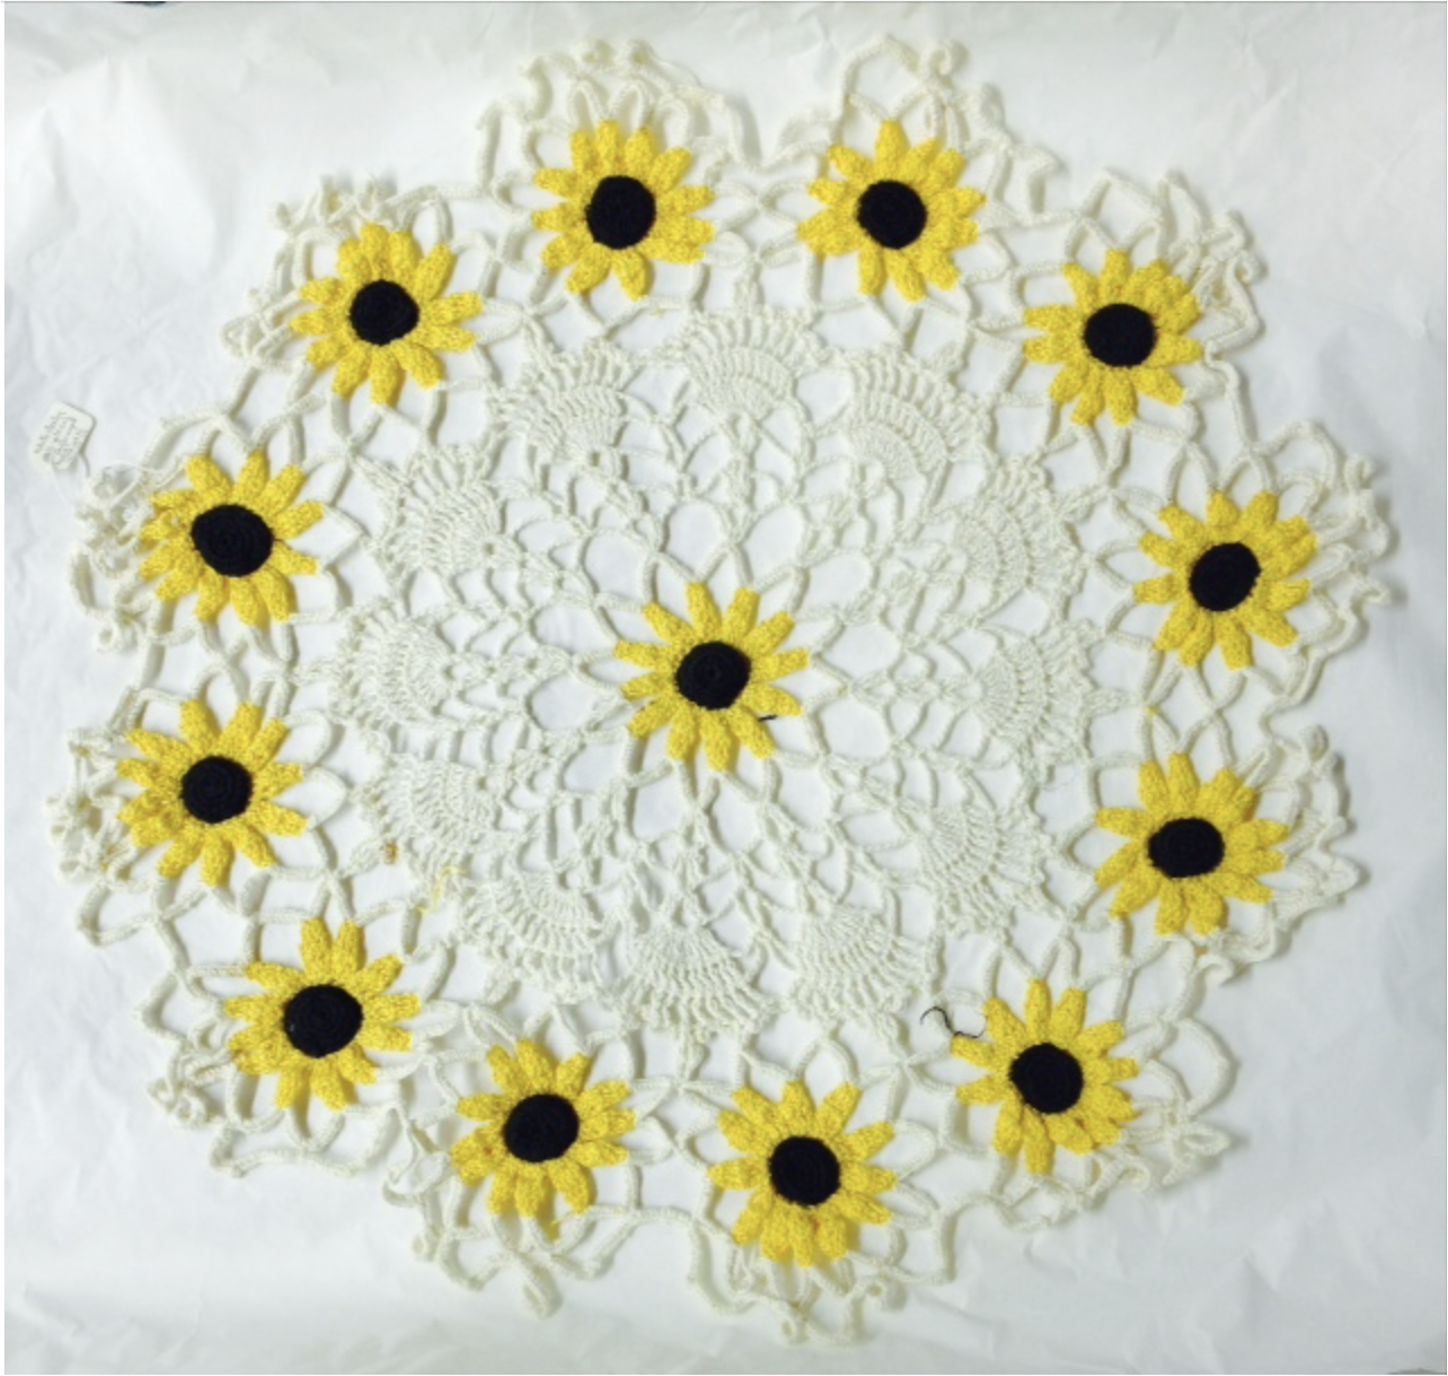 A crocheted doily on a white background with a pattern of yellow and black flowers